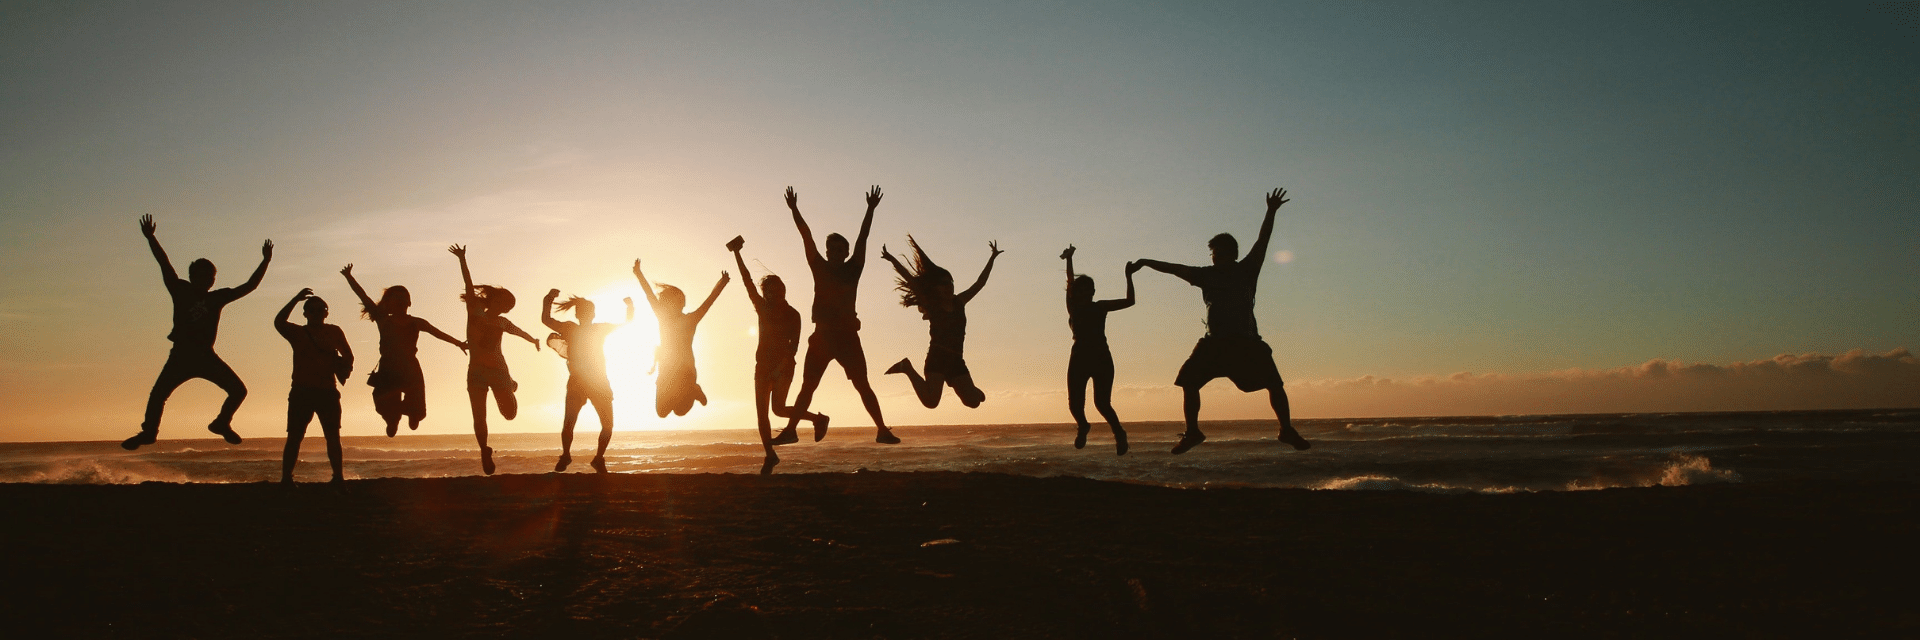 A group of people jumping in the air on the beach silhouetted